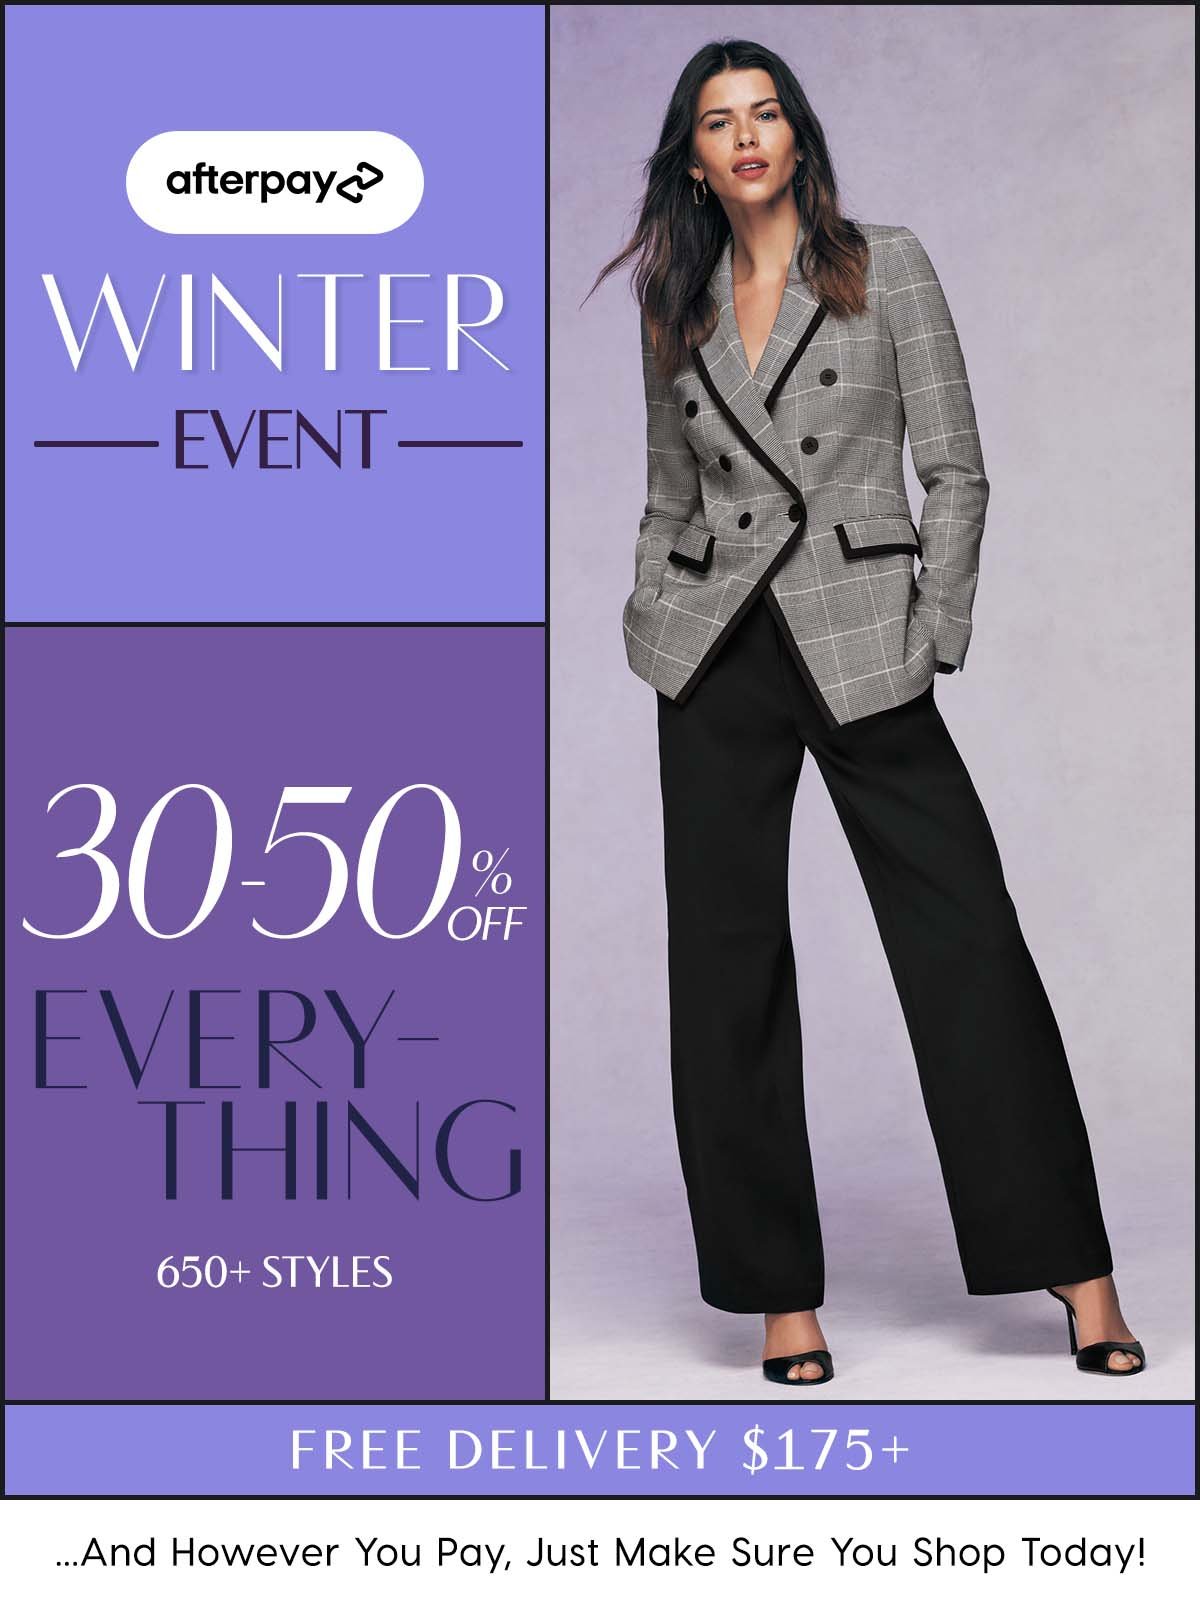 Afterpay Winter Event. Online Only. 30-50% Off Everything. 650+ Styles. Free Delivery $175+ ...And However You Pay, Just Make Sure You Shop Today!  